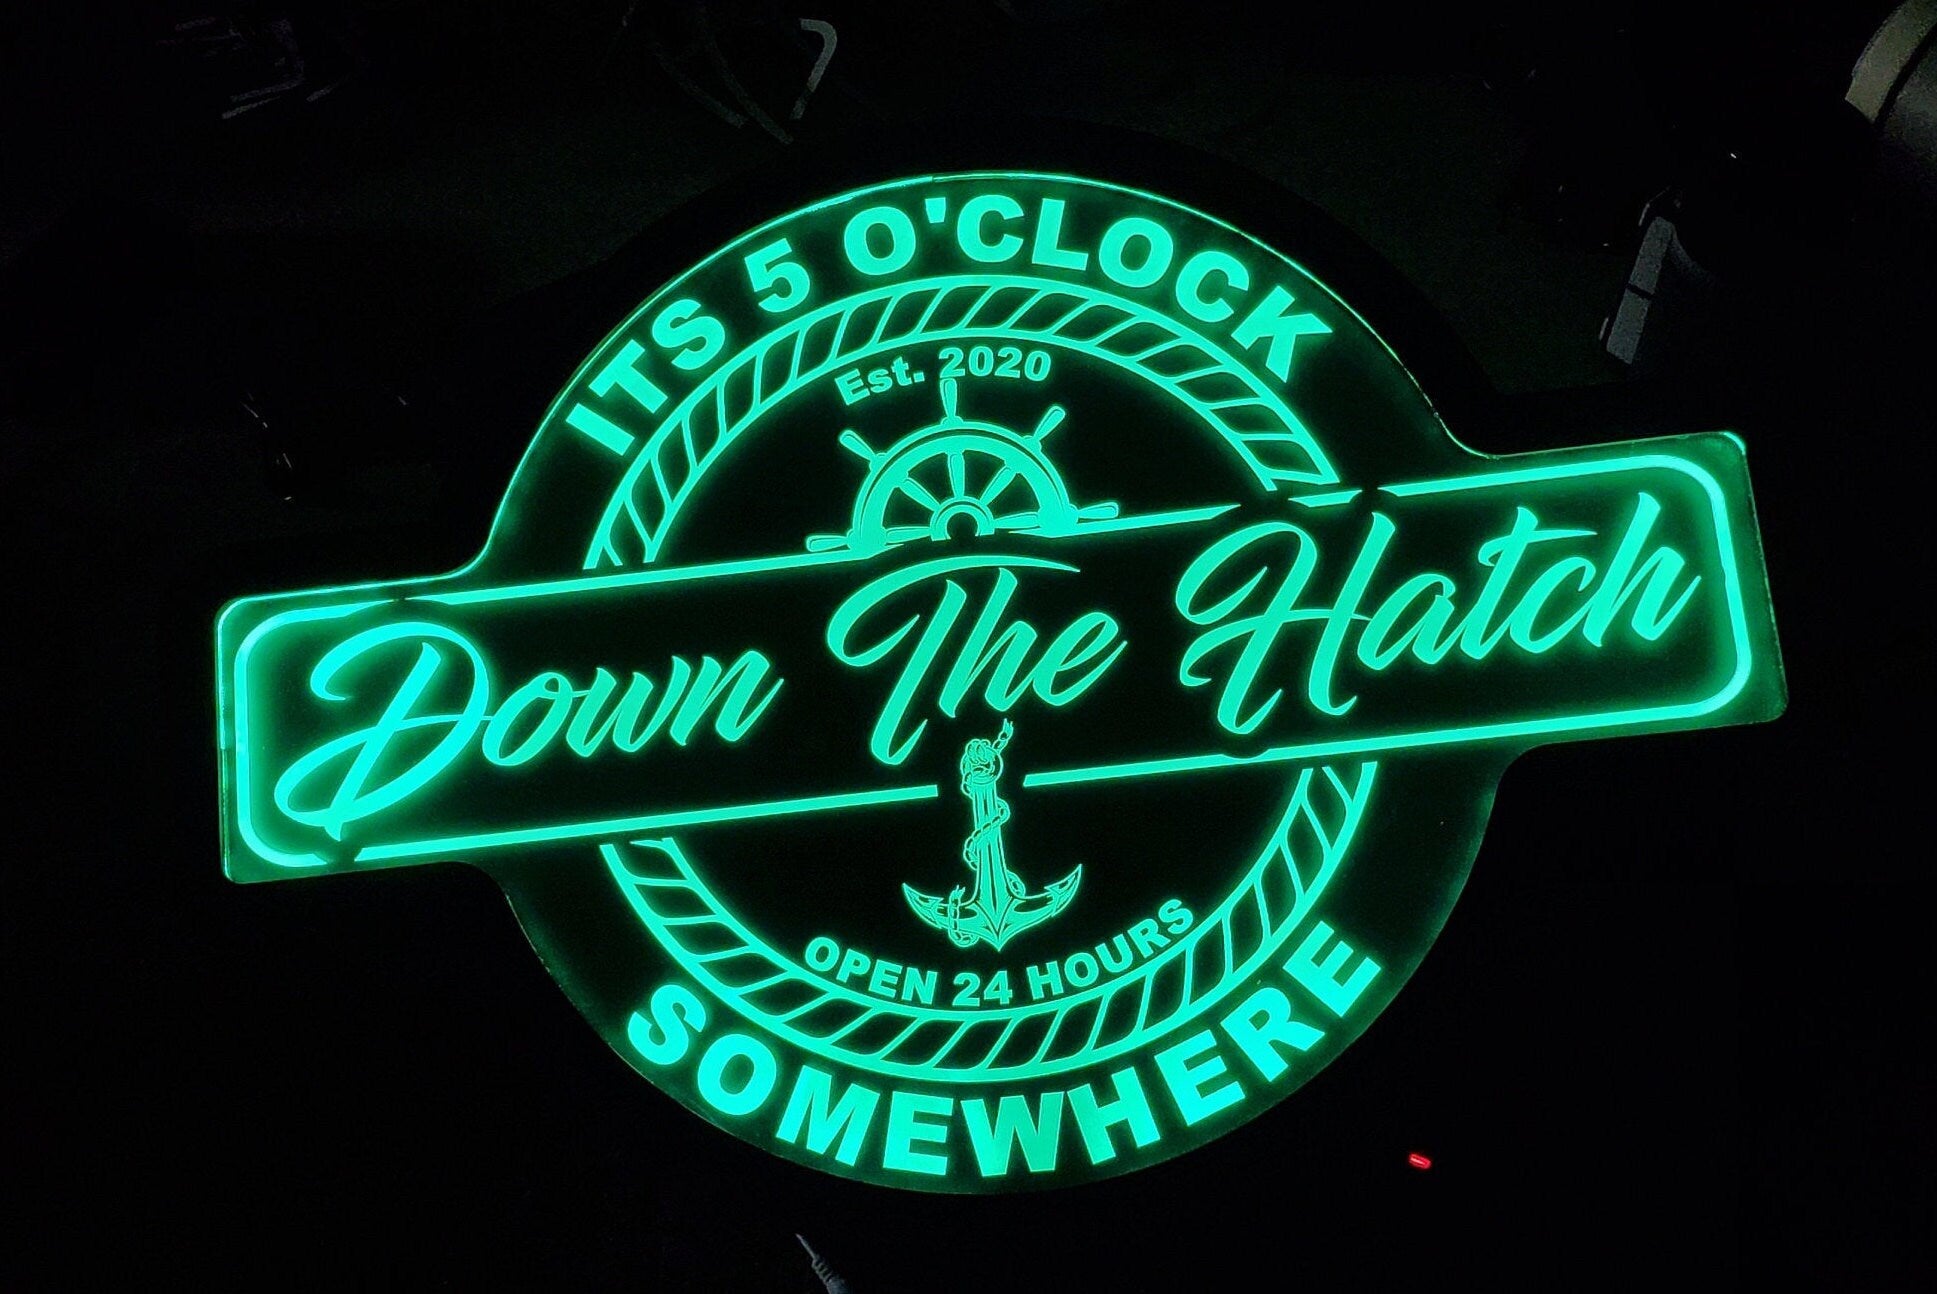 Custom Boater, Boat Name, Marina, Boat Themed Led Wall Sign - Neon - Like - Color Changing - Remote Control - 4 Sizes Free Shipping